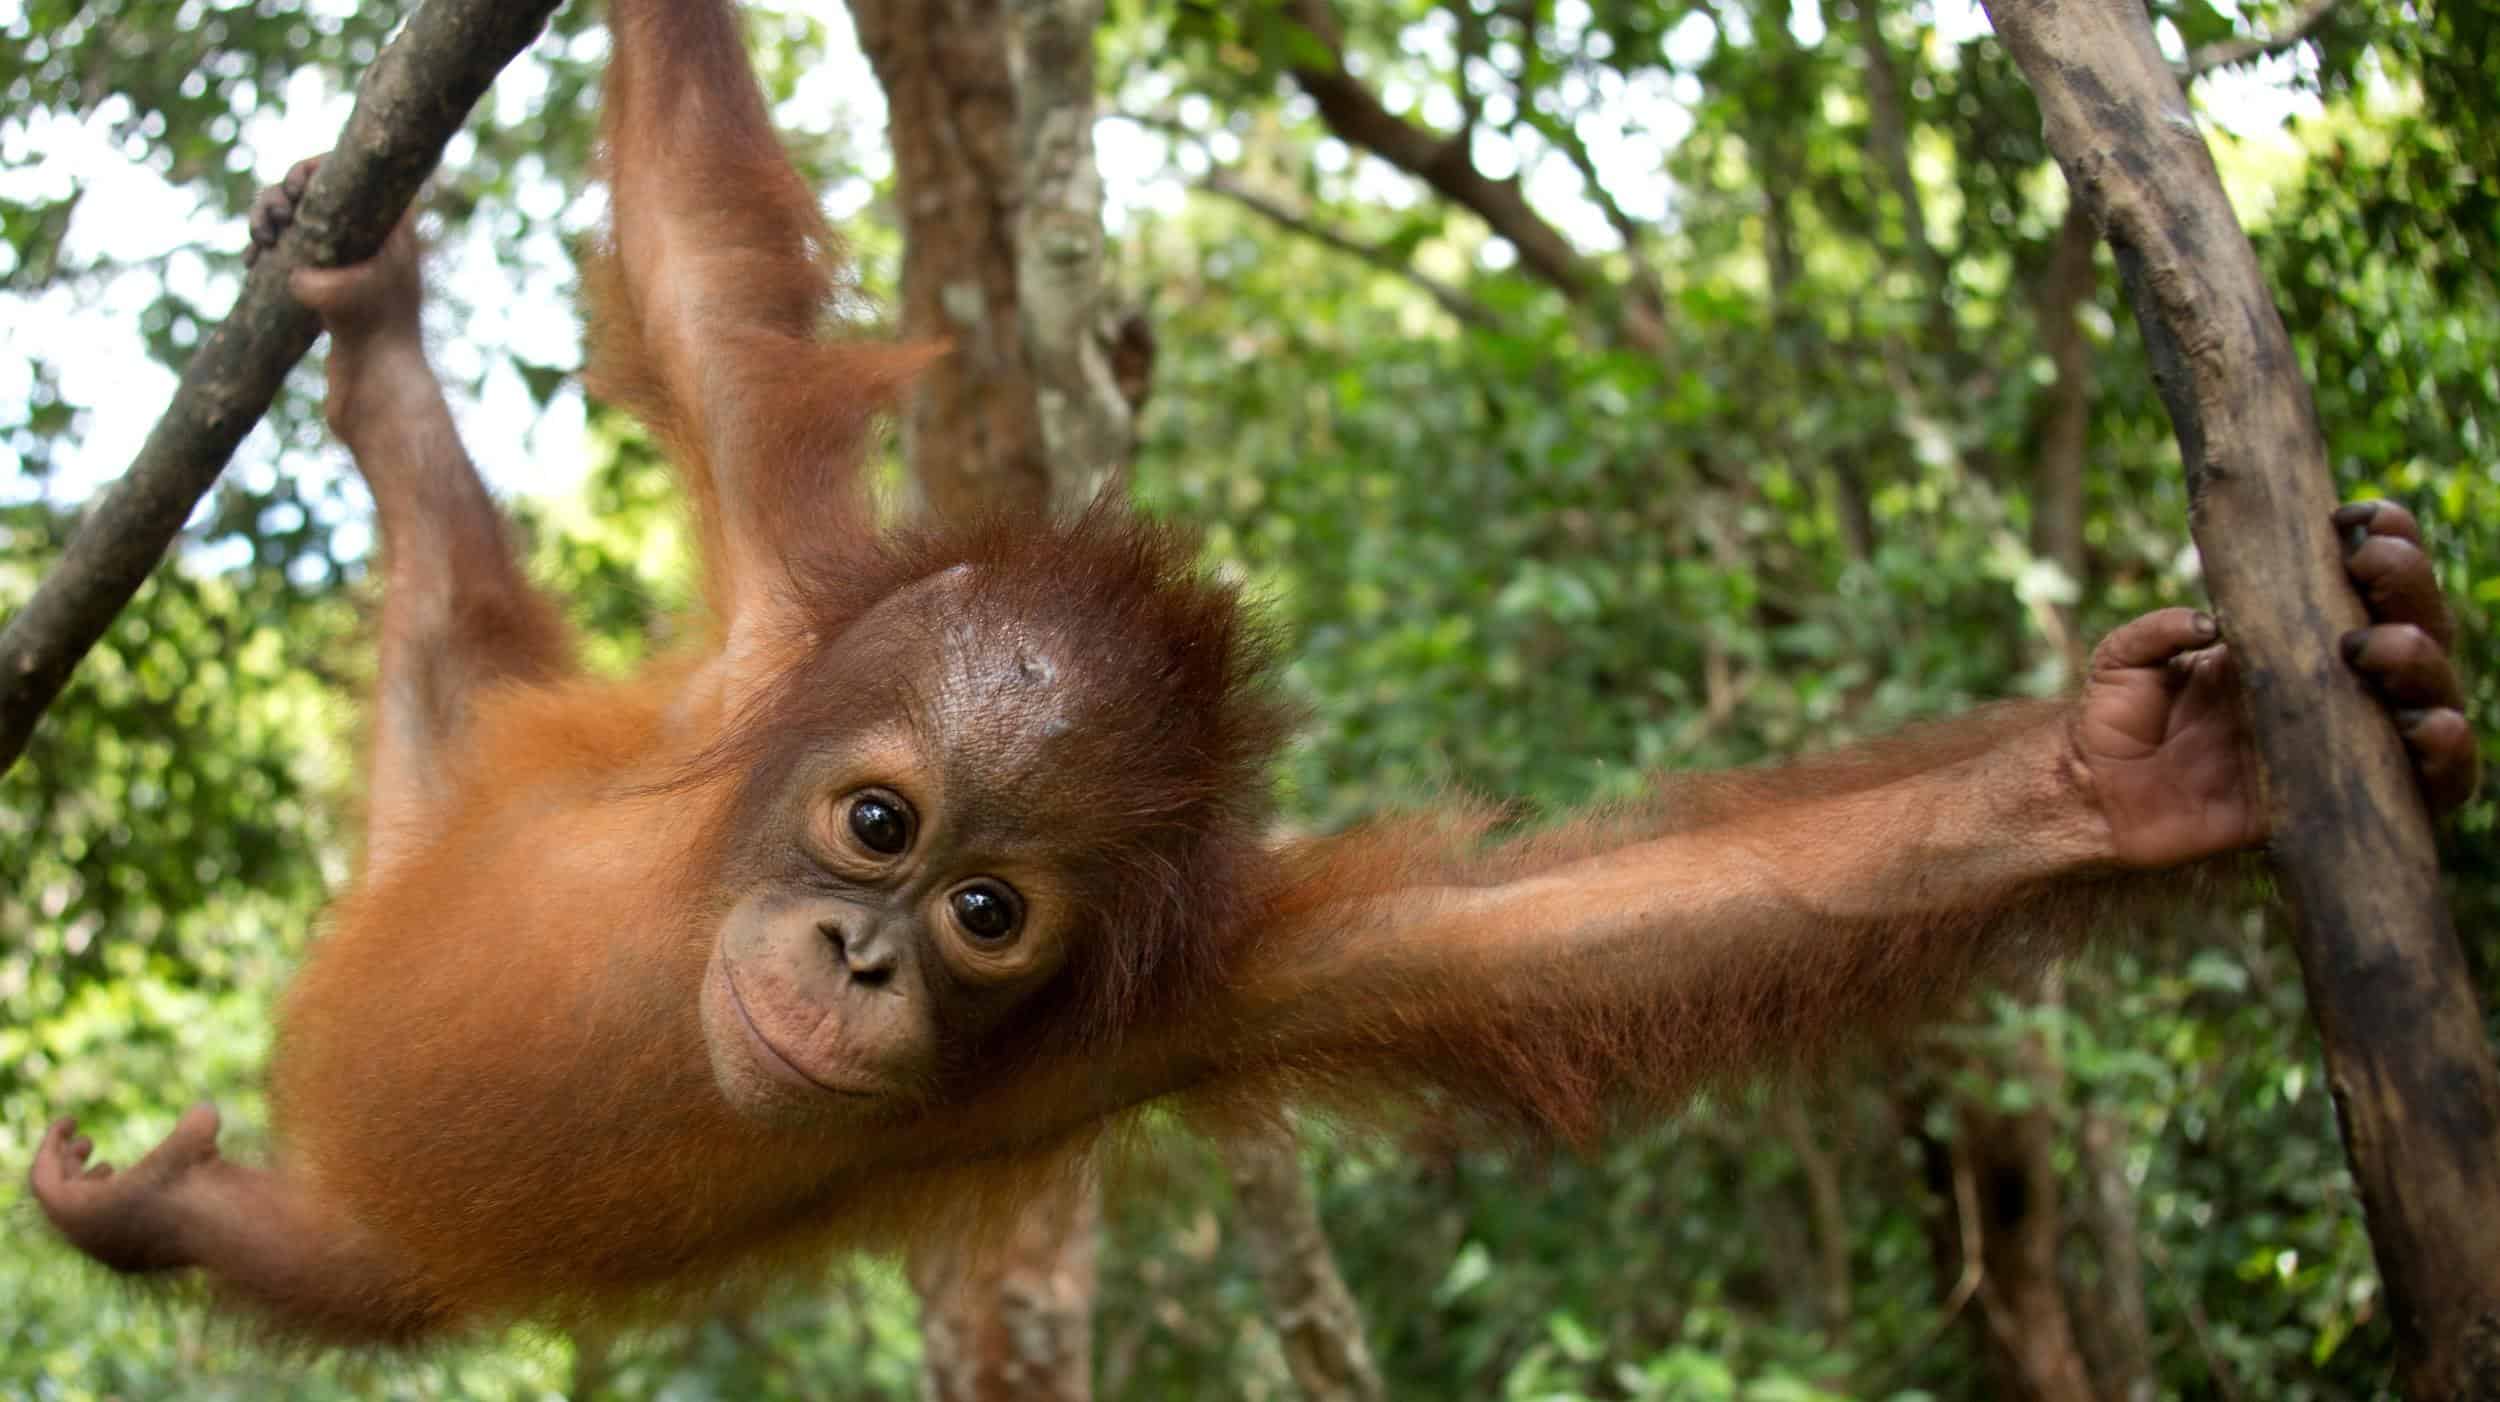 British food companies still using palm oil irresponsibly named and shamed